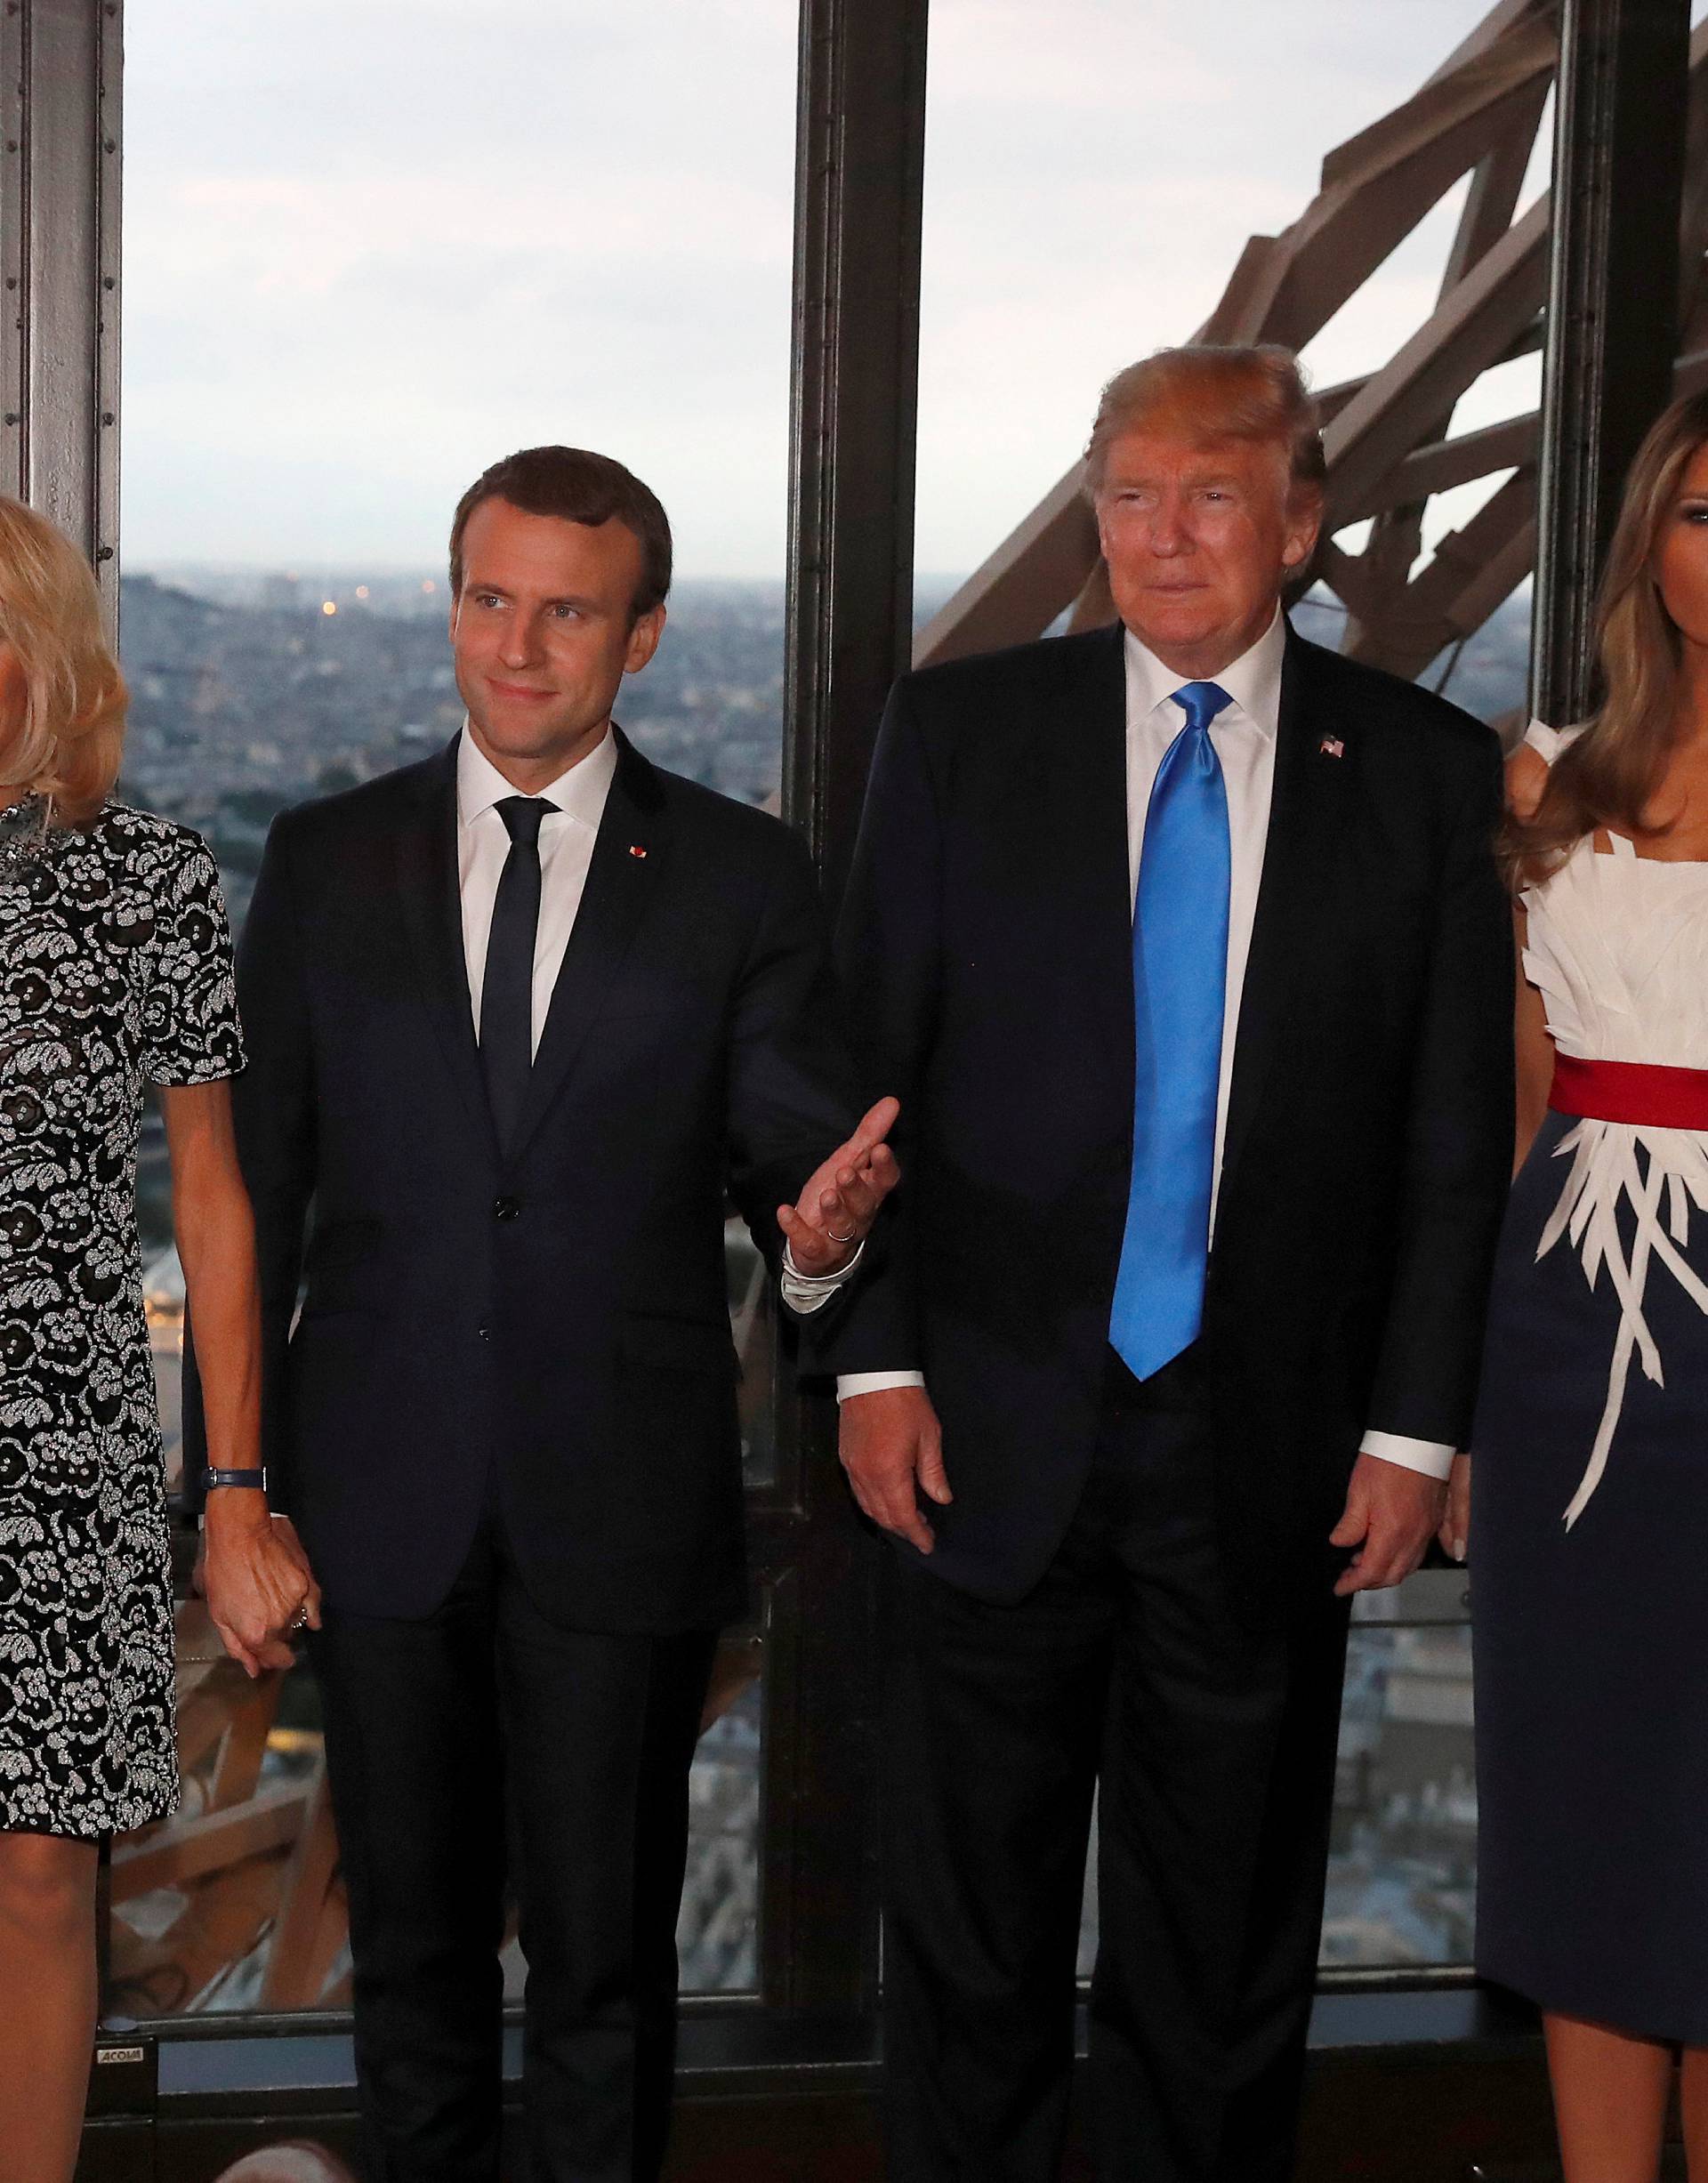 From L-R, Brigitte Macron, wife of French President Emmanuel Macron, U.S. President Donald Trump and  First lady Melania Trump pose at the Jules Verne restaurant for a private dinner at the Eiffel Tower in Paris